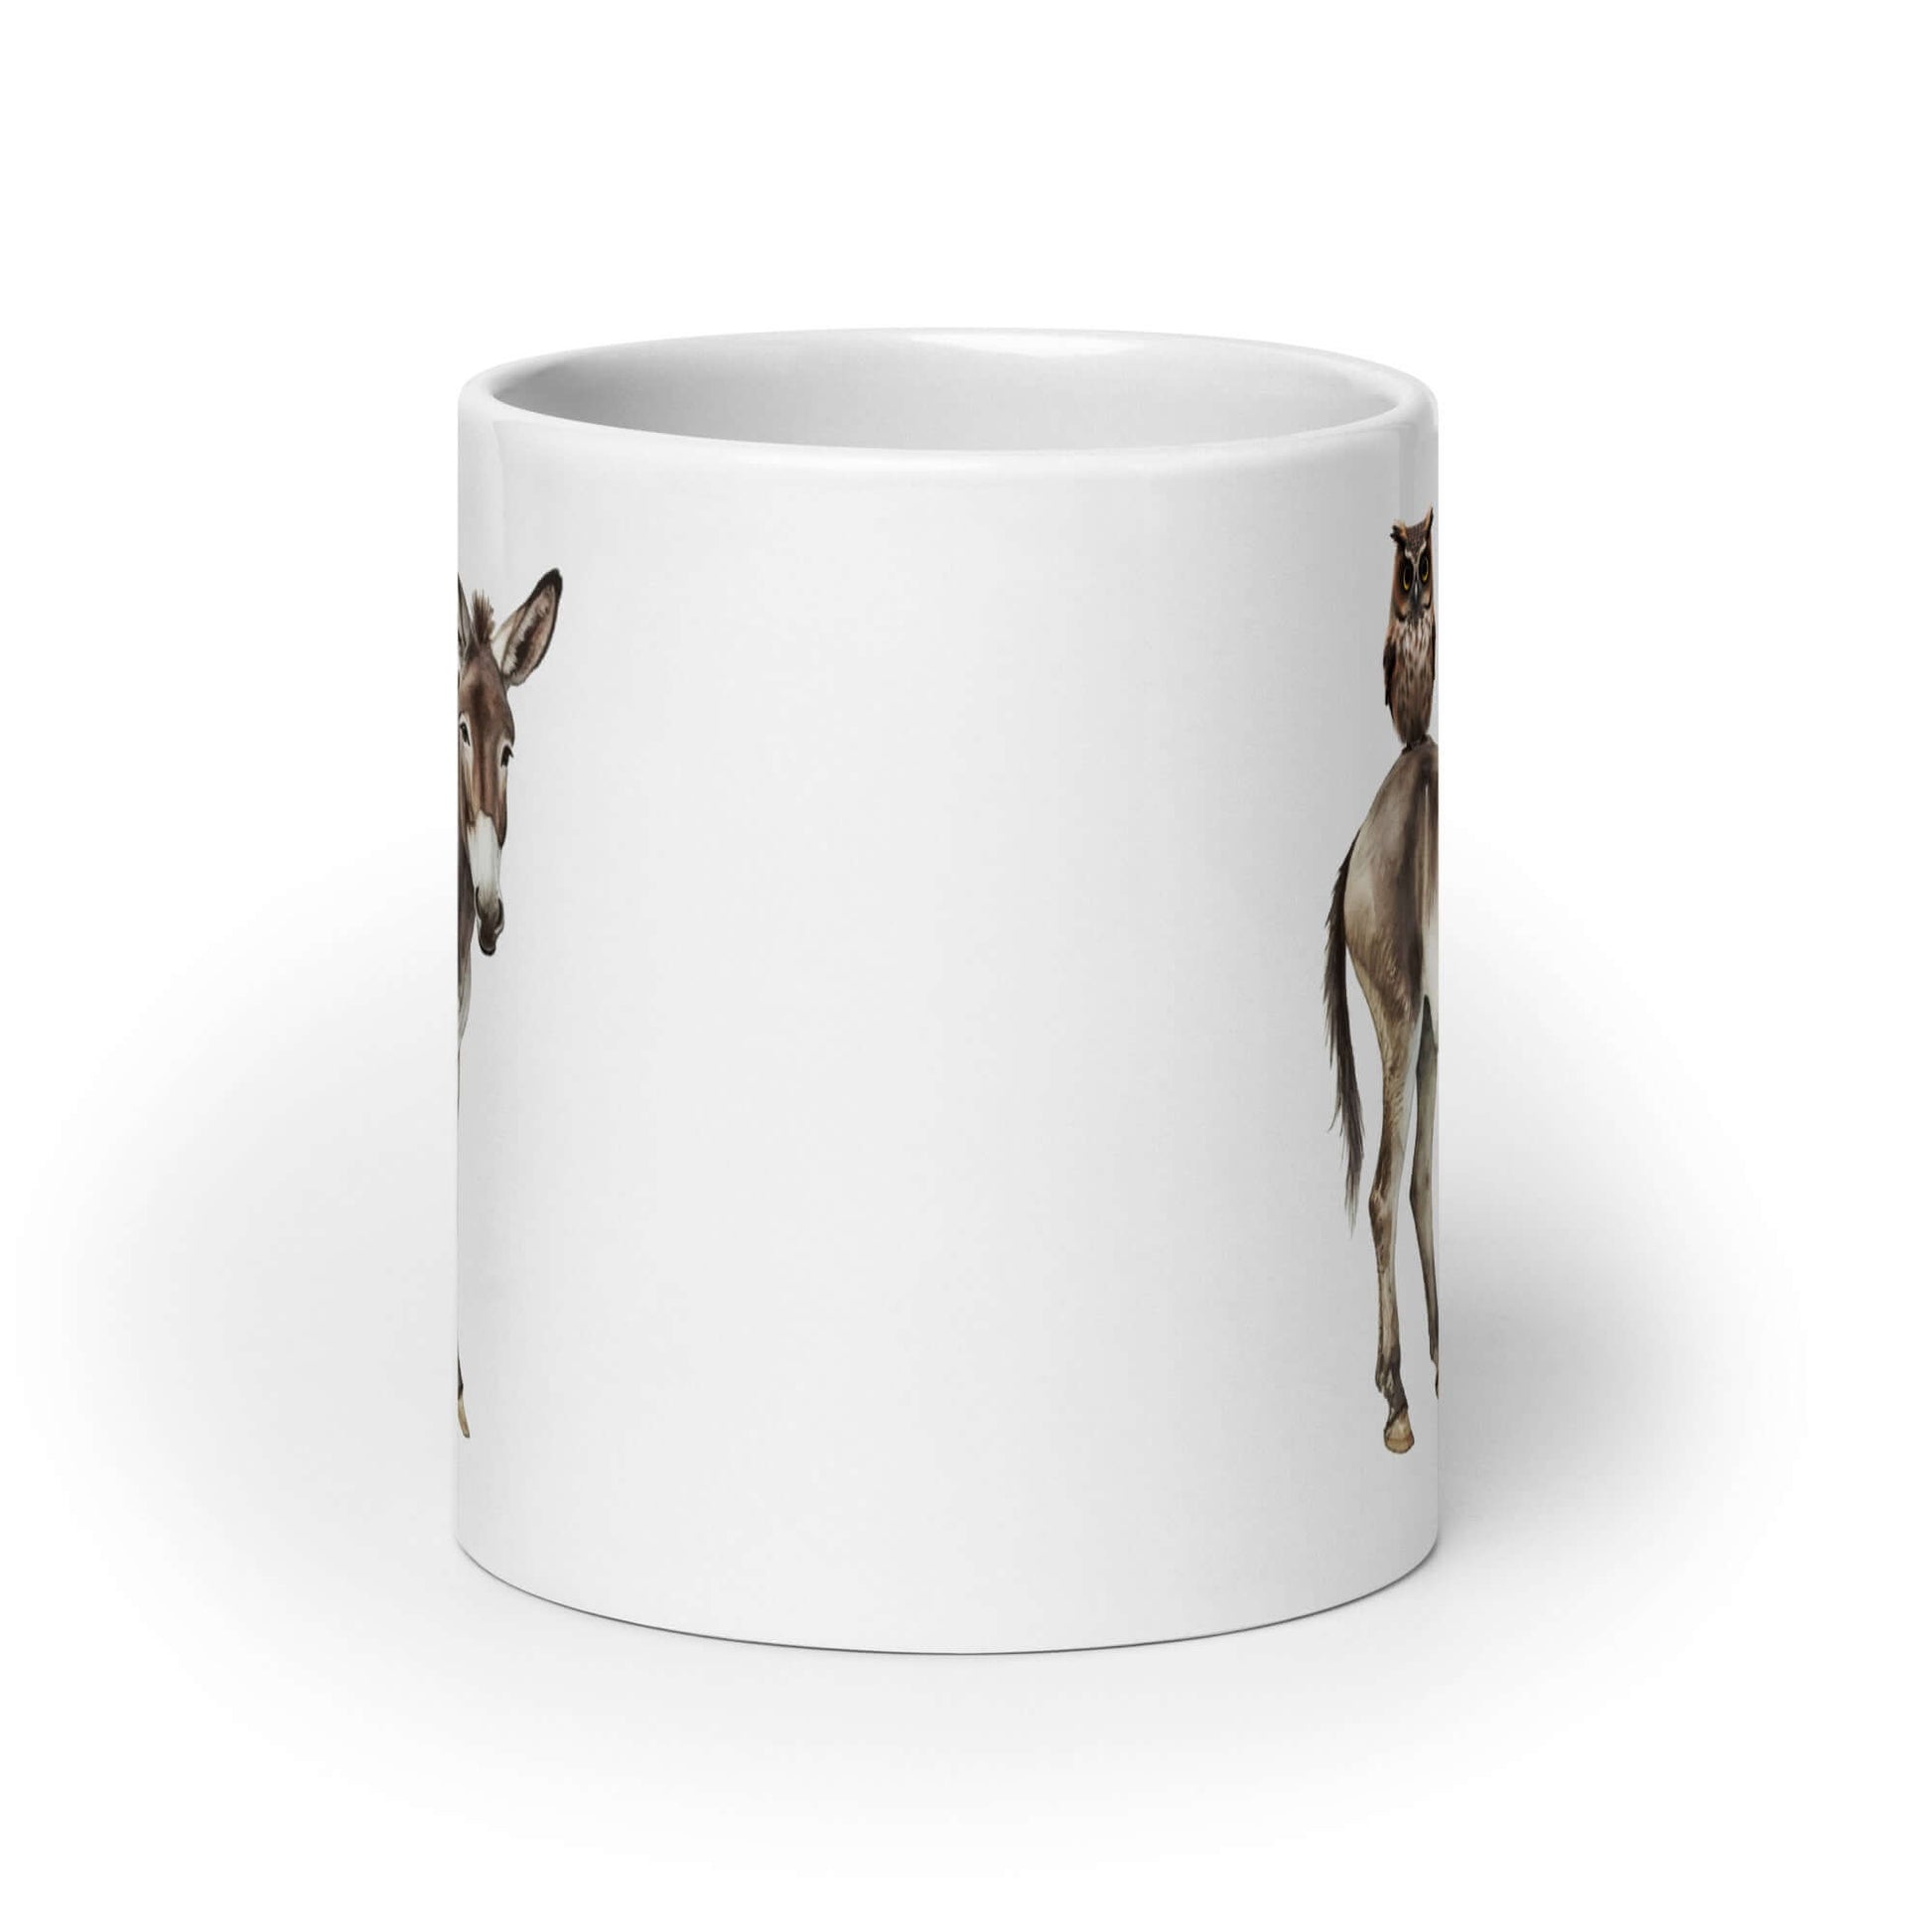 White ceramic coffee mug with an image of a donkey with wise owl sitting on it printed on both sides of the mug.